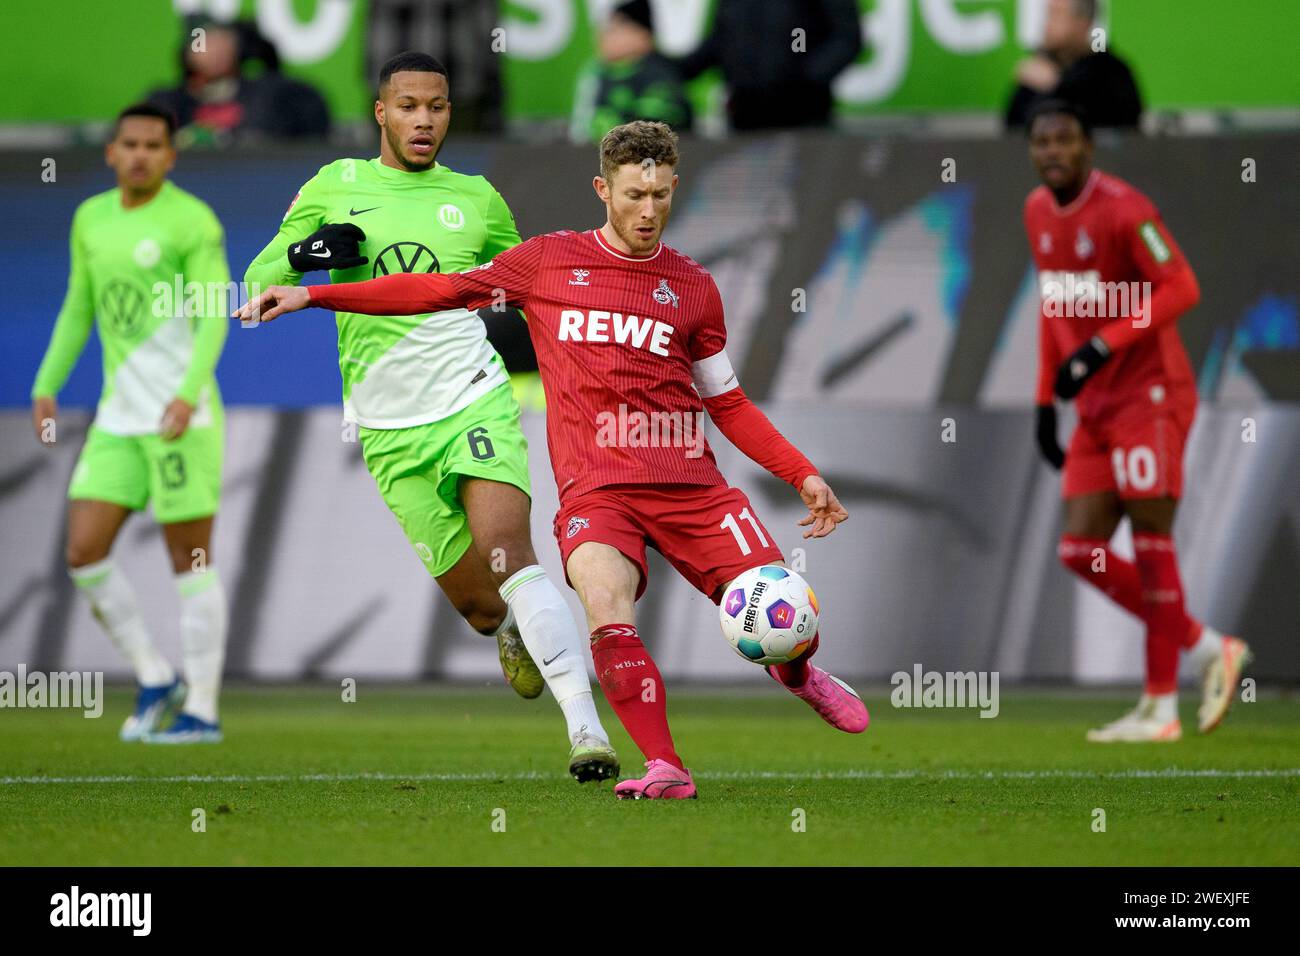 Wolfsburg, Germany. 27th Jan, 2024. Soccer, Bundesliga, VfL Wolfsburg - 1. FC Köln, Matchday 19, Volkswagen Arena. Cologne's Florian Kainz (r) plays against Wolfsburg's Aster Vranckx. Credit: Swen Pförtner/dpa - IMPORTANT NOTE: In accordance with the regulations of the DFL German Football League and the DFB German Football Association, it is prohibited to utilize or have utilized photographs taken in the stadium and/or of the match in the form of sequential images and/or video-like photo series./dpa/Alamy Live News Stock Photo